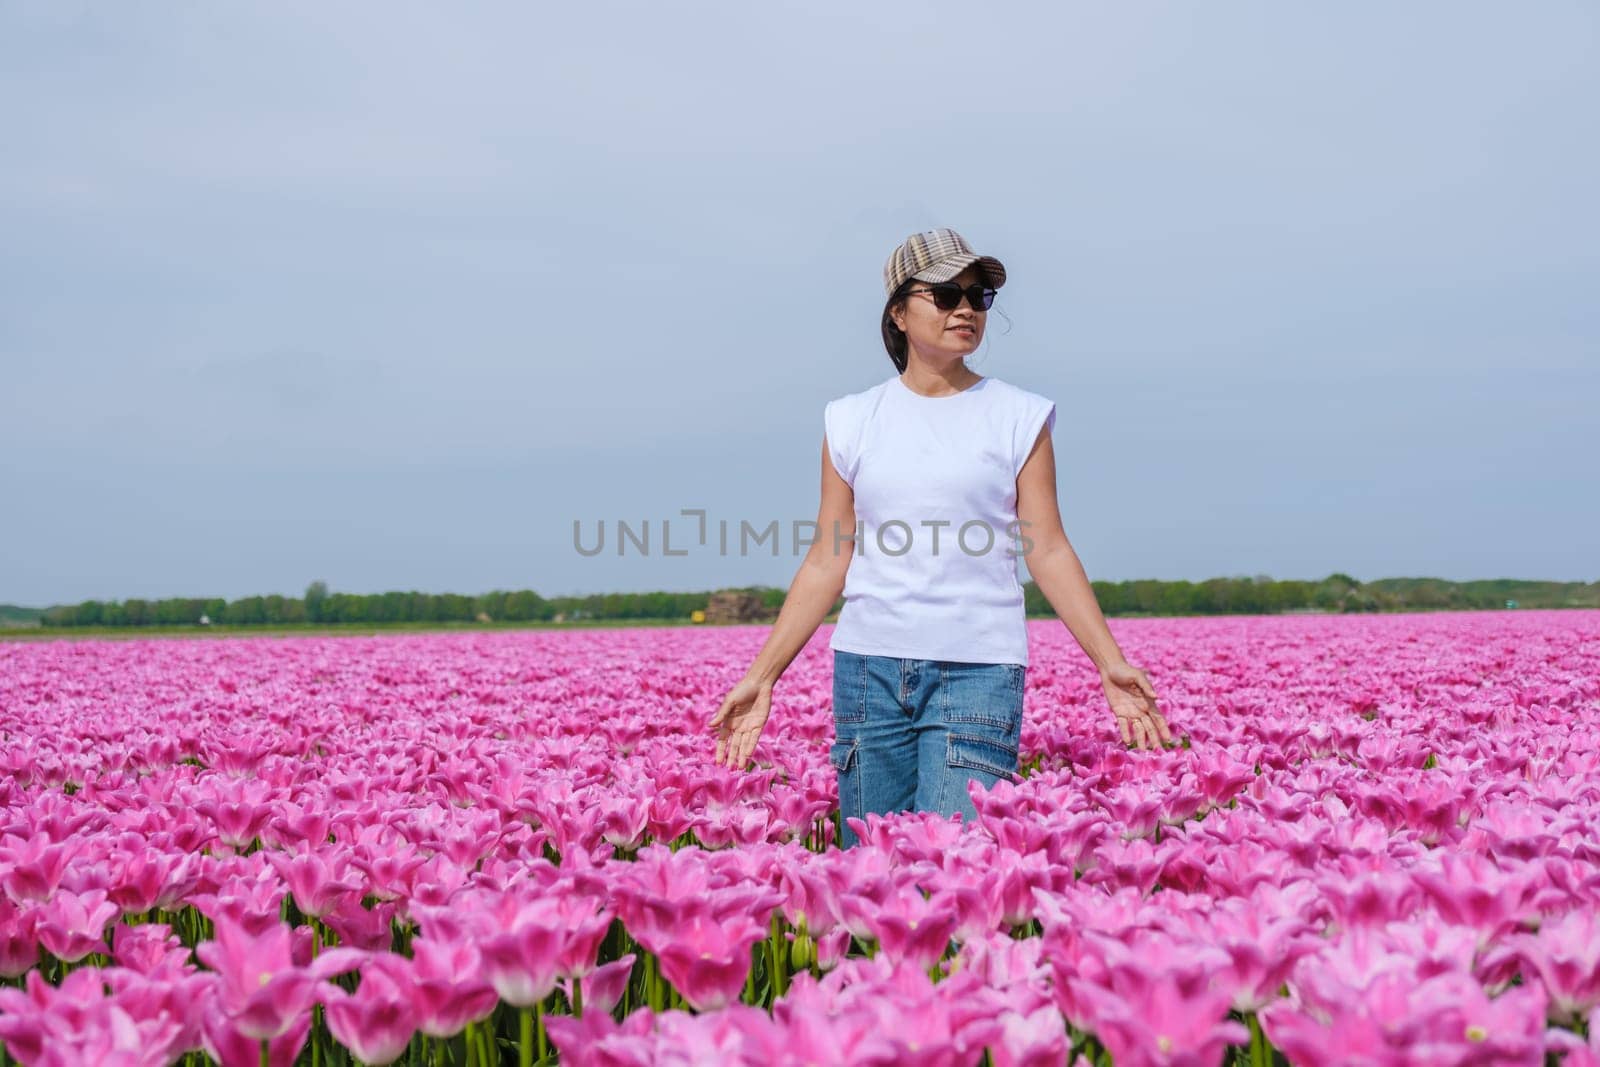 A woman elegantly stands amidst a vibrant sea of pink tulips in a field in Texel, Netherlands by fokkebok